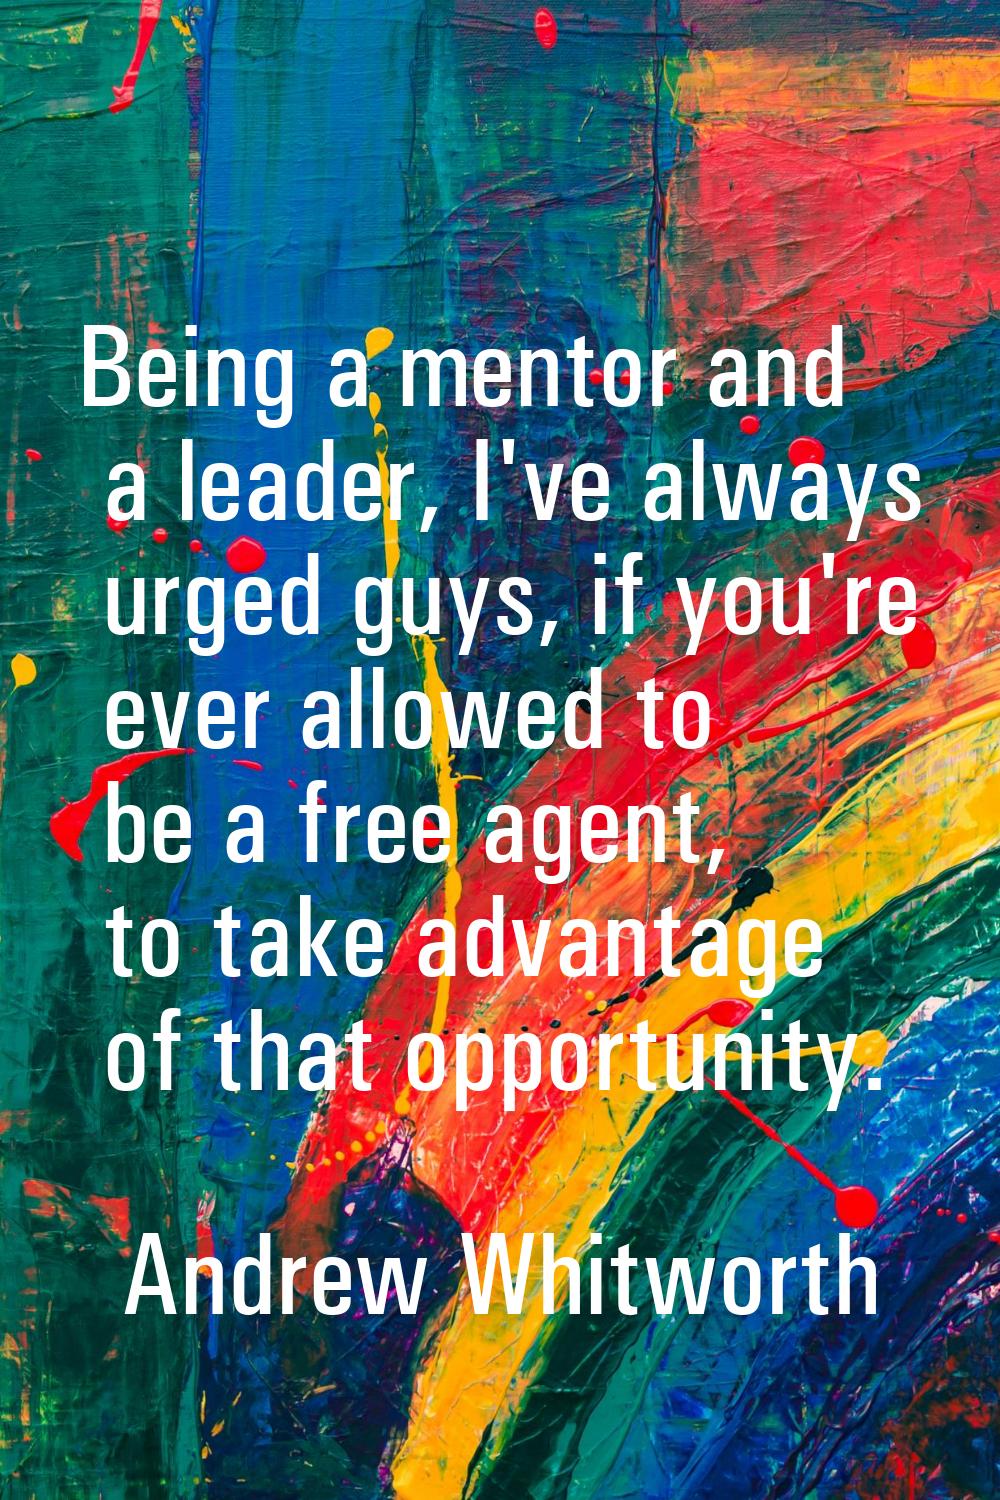 Being a mentor and a leader, I've always urged guys, if you're ever allowed to be a free agent, to 